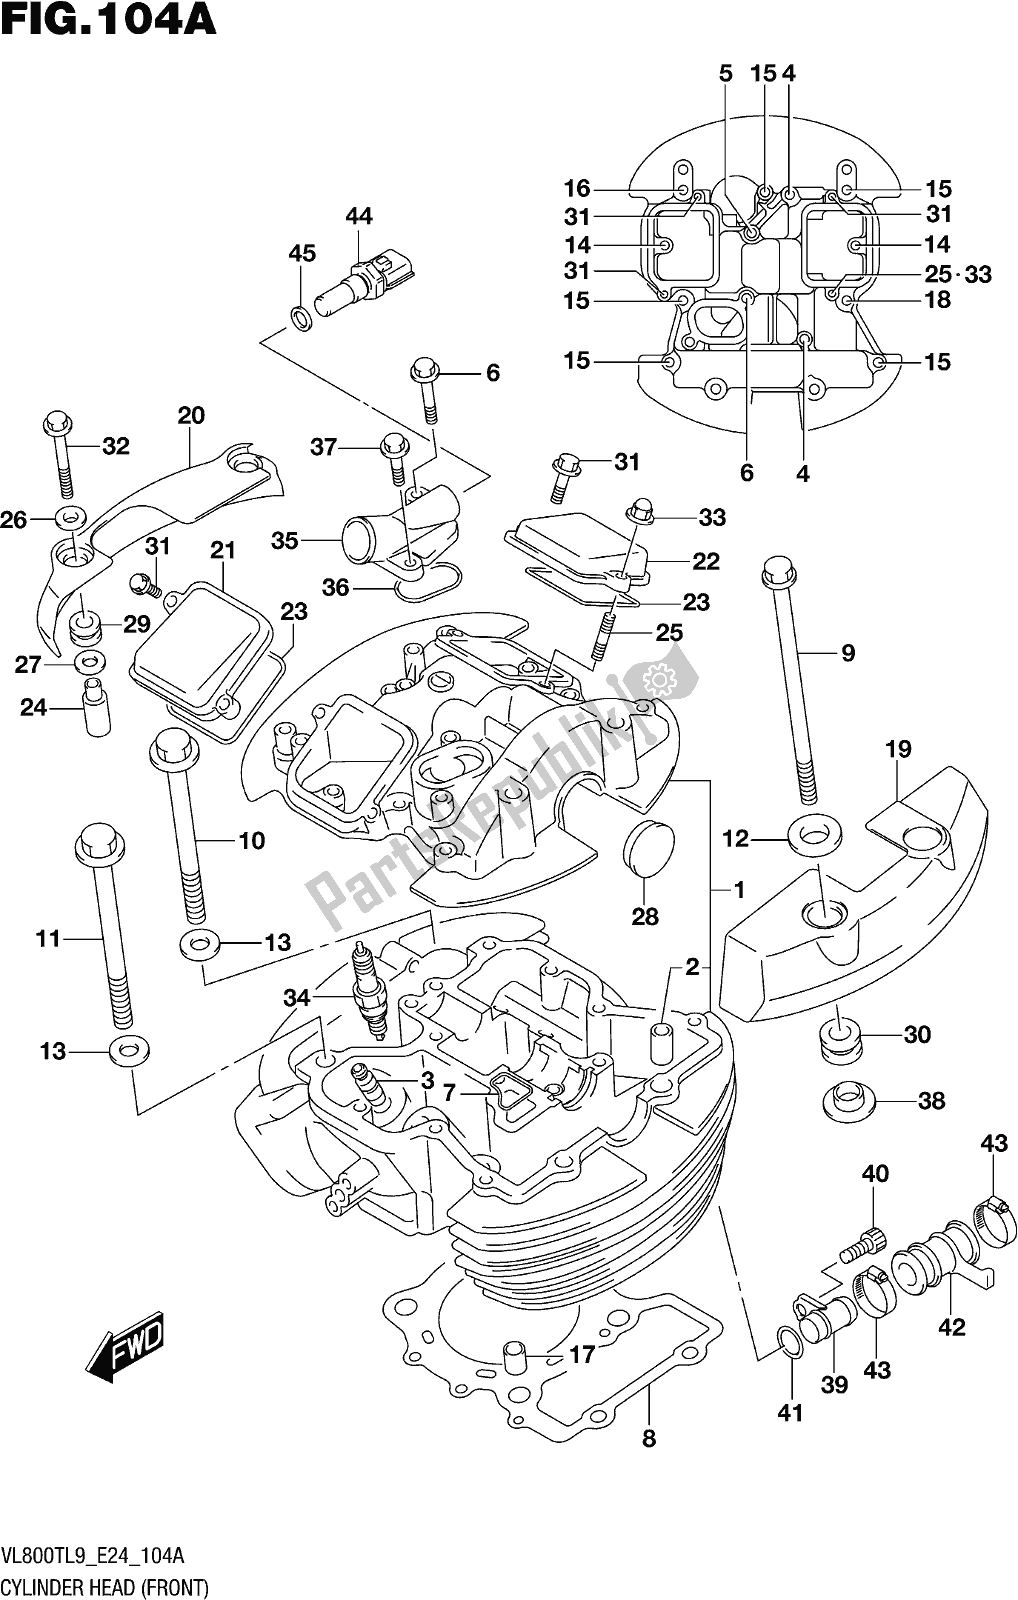 All parts for the Fig. 104a Cylinder Head (front) of the Suzuki VL 800T 2019